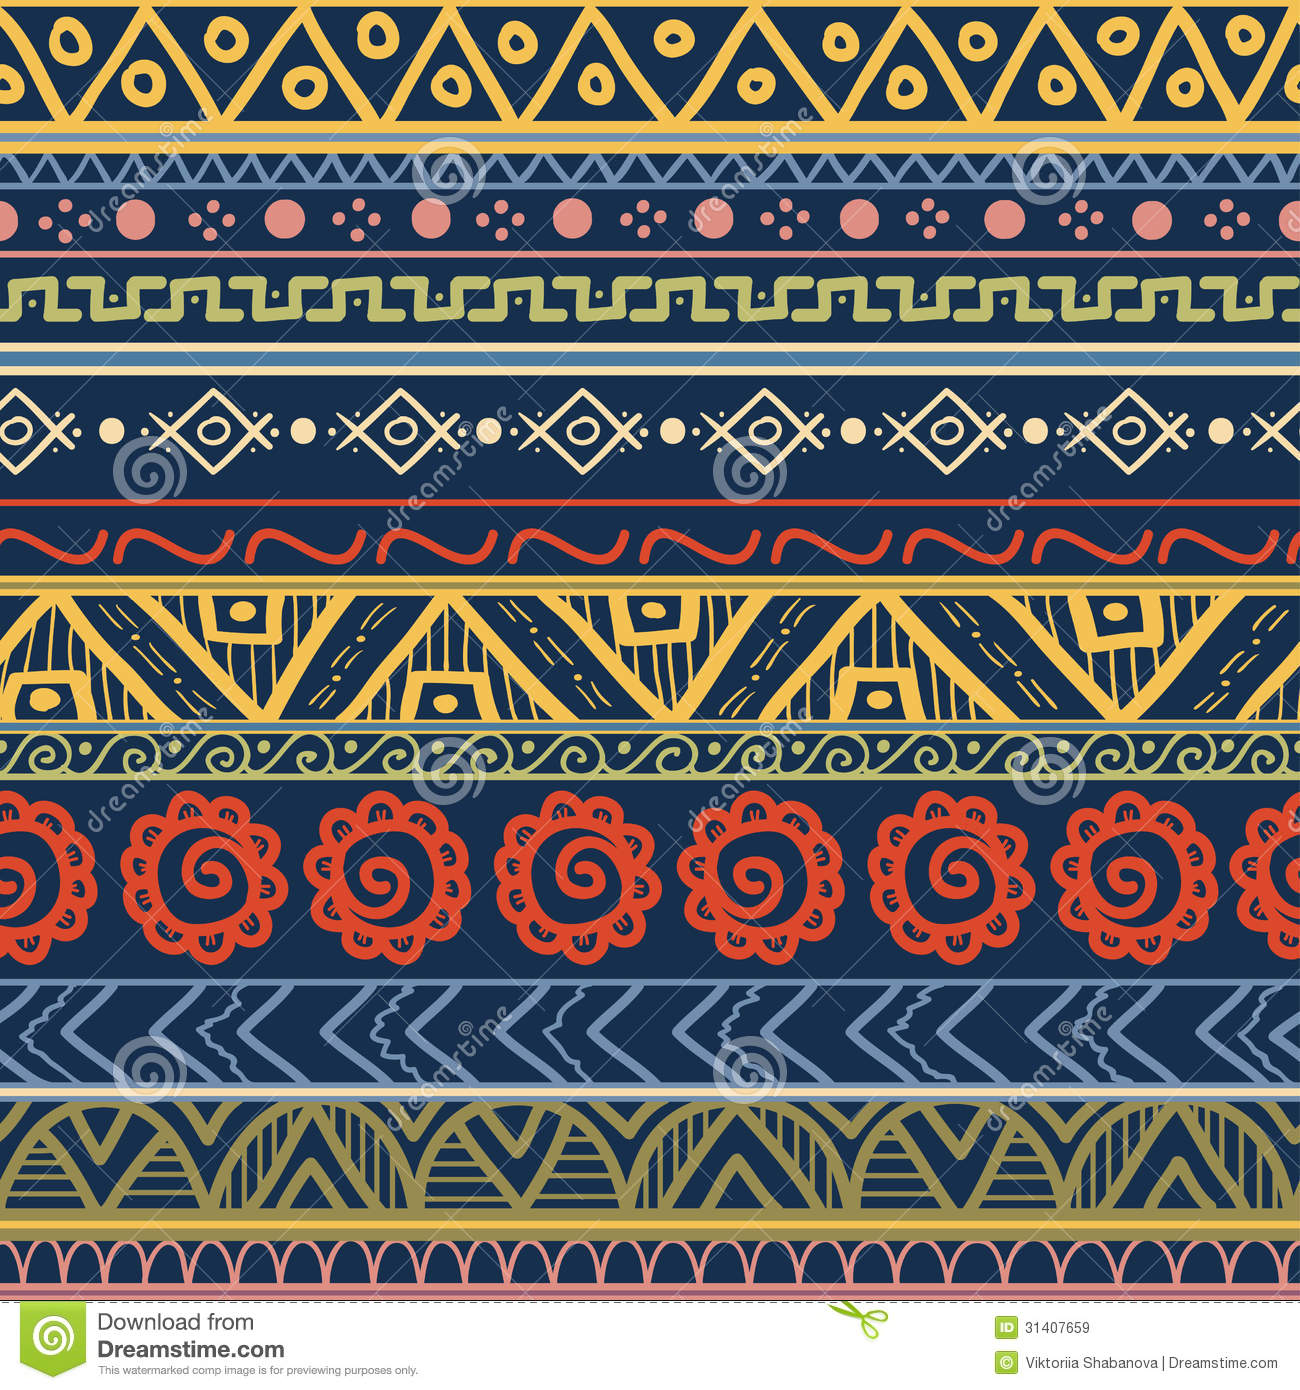  on tribal pattern wallpapers